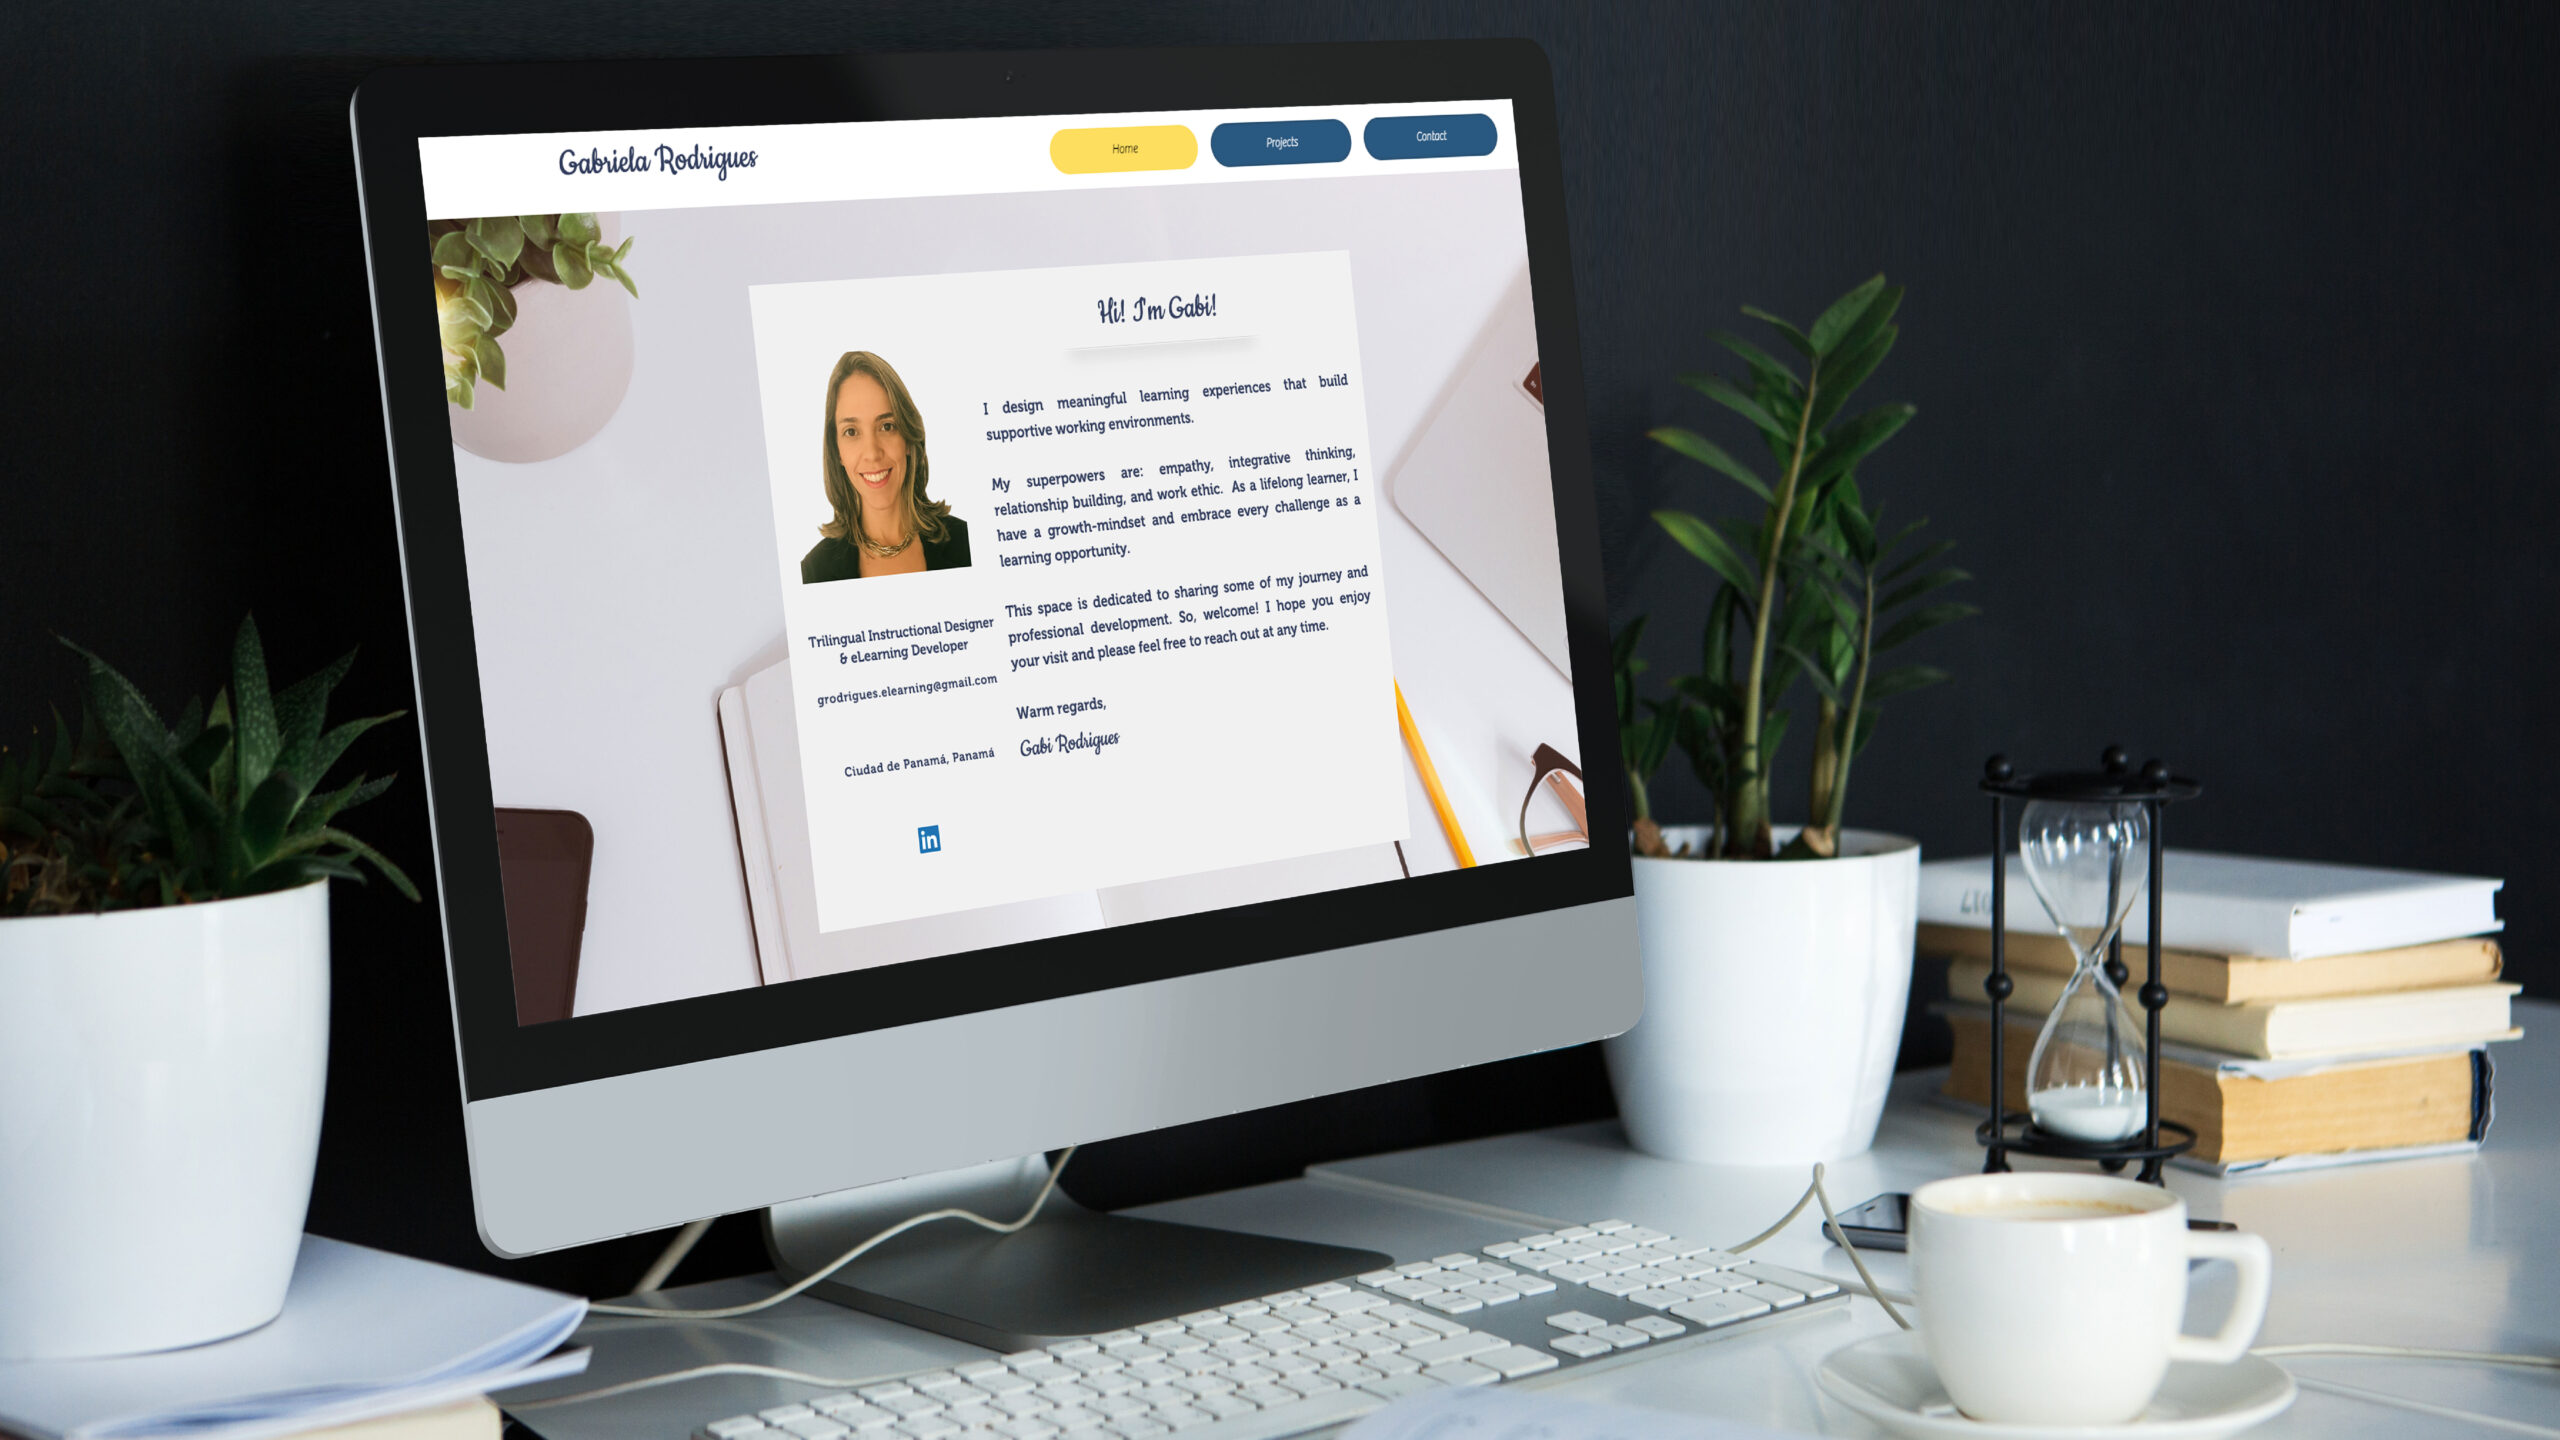 Gabi Rodrigues's Student Story | The eLearning Designer's Academy by Tim Slade